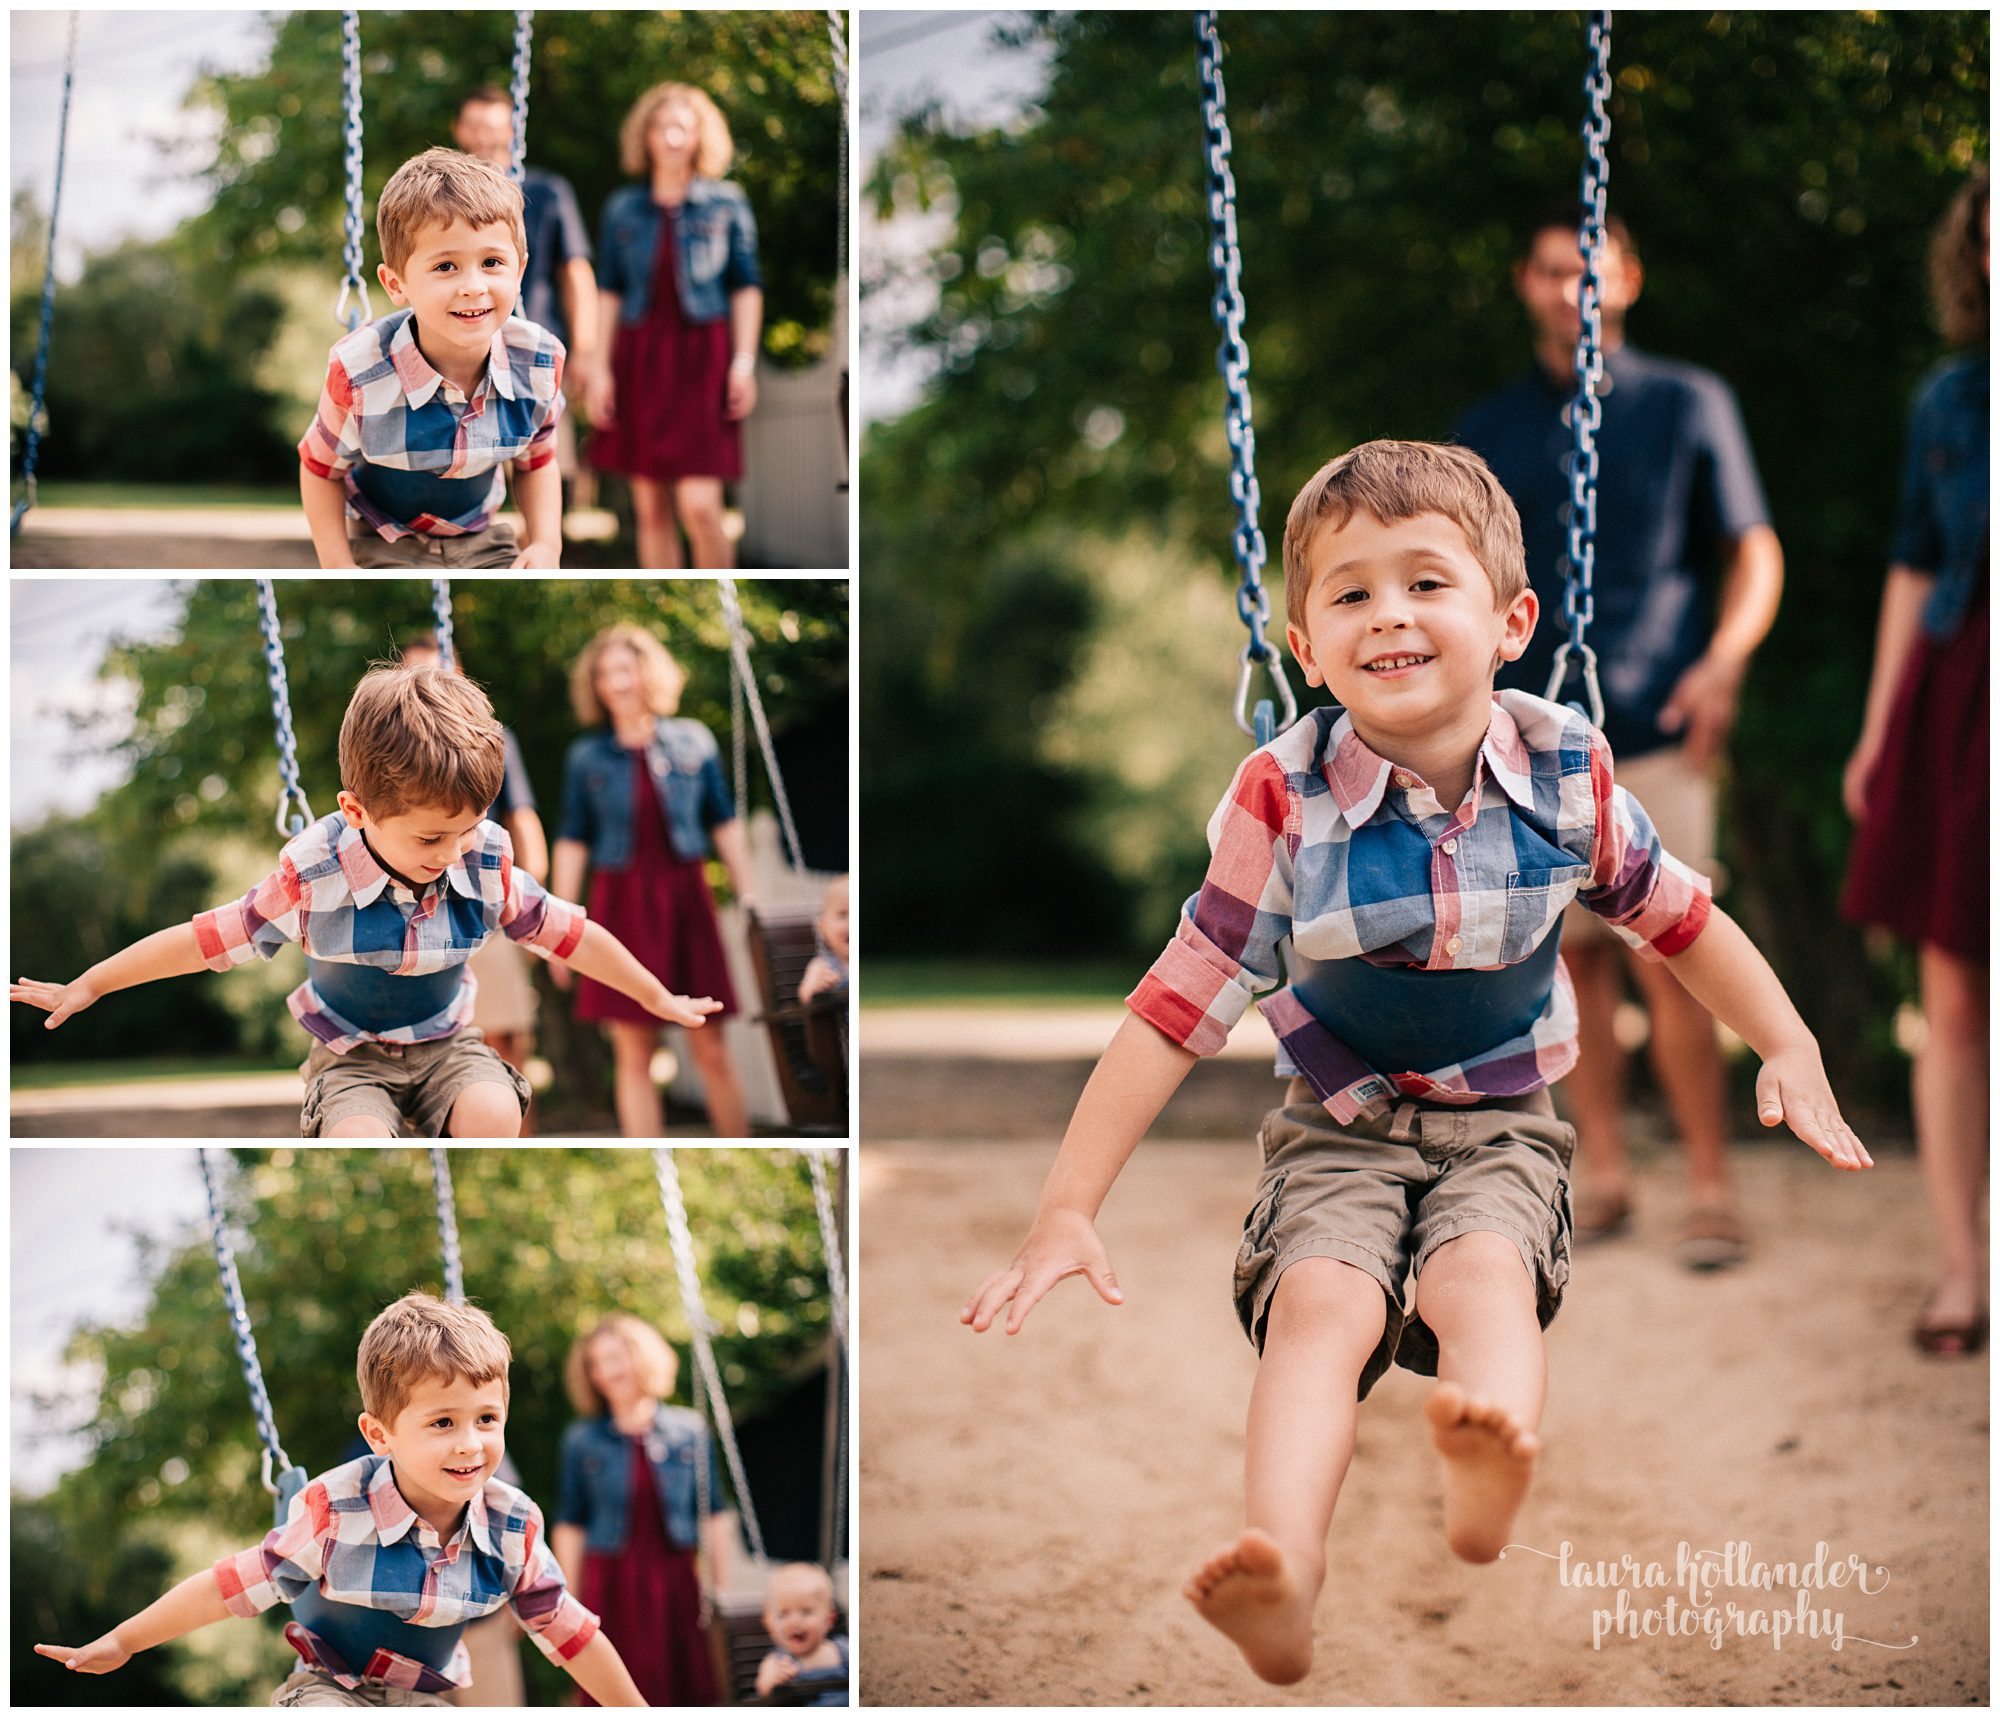 toddler boy on swing set, cottage summer mini sessions, Laura Hollander Photography